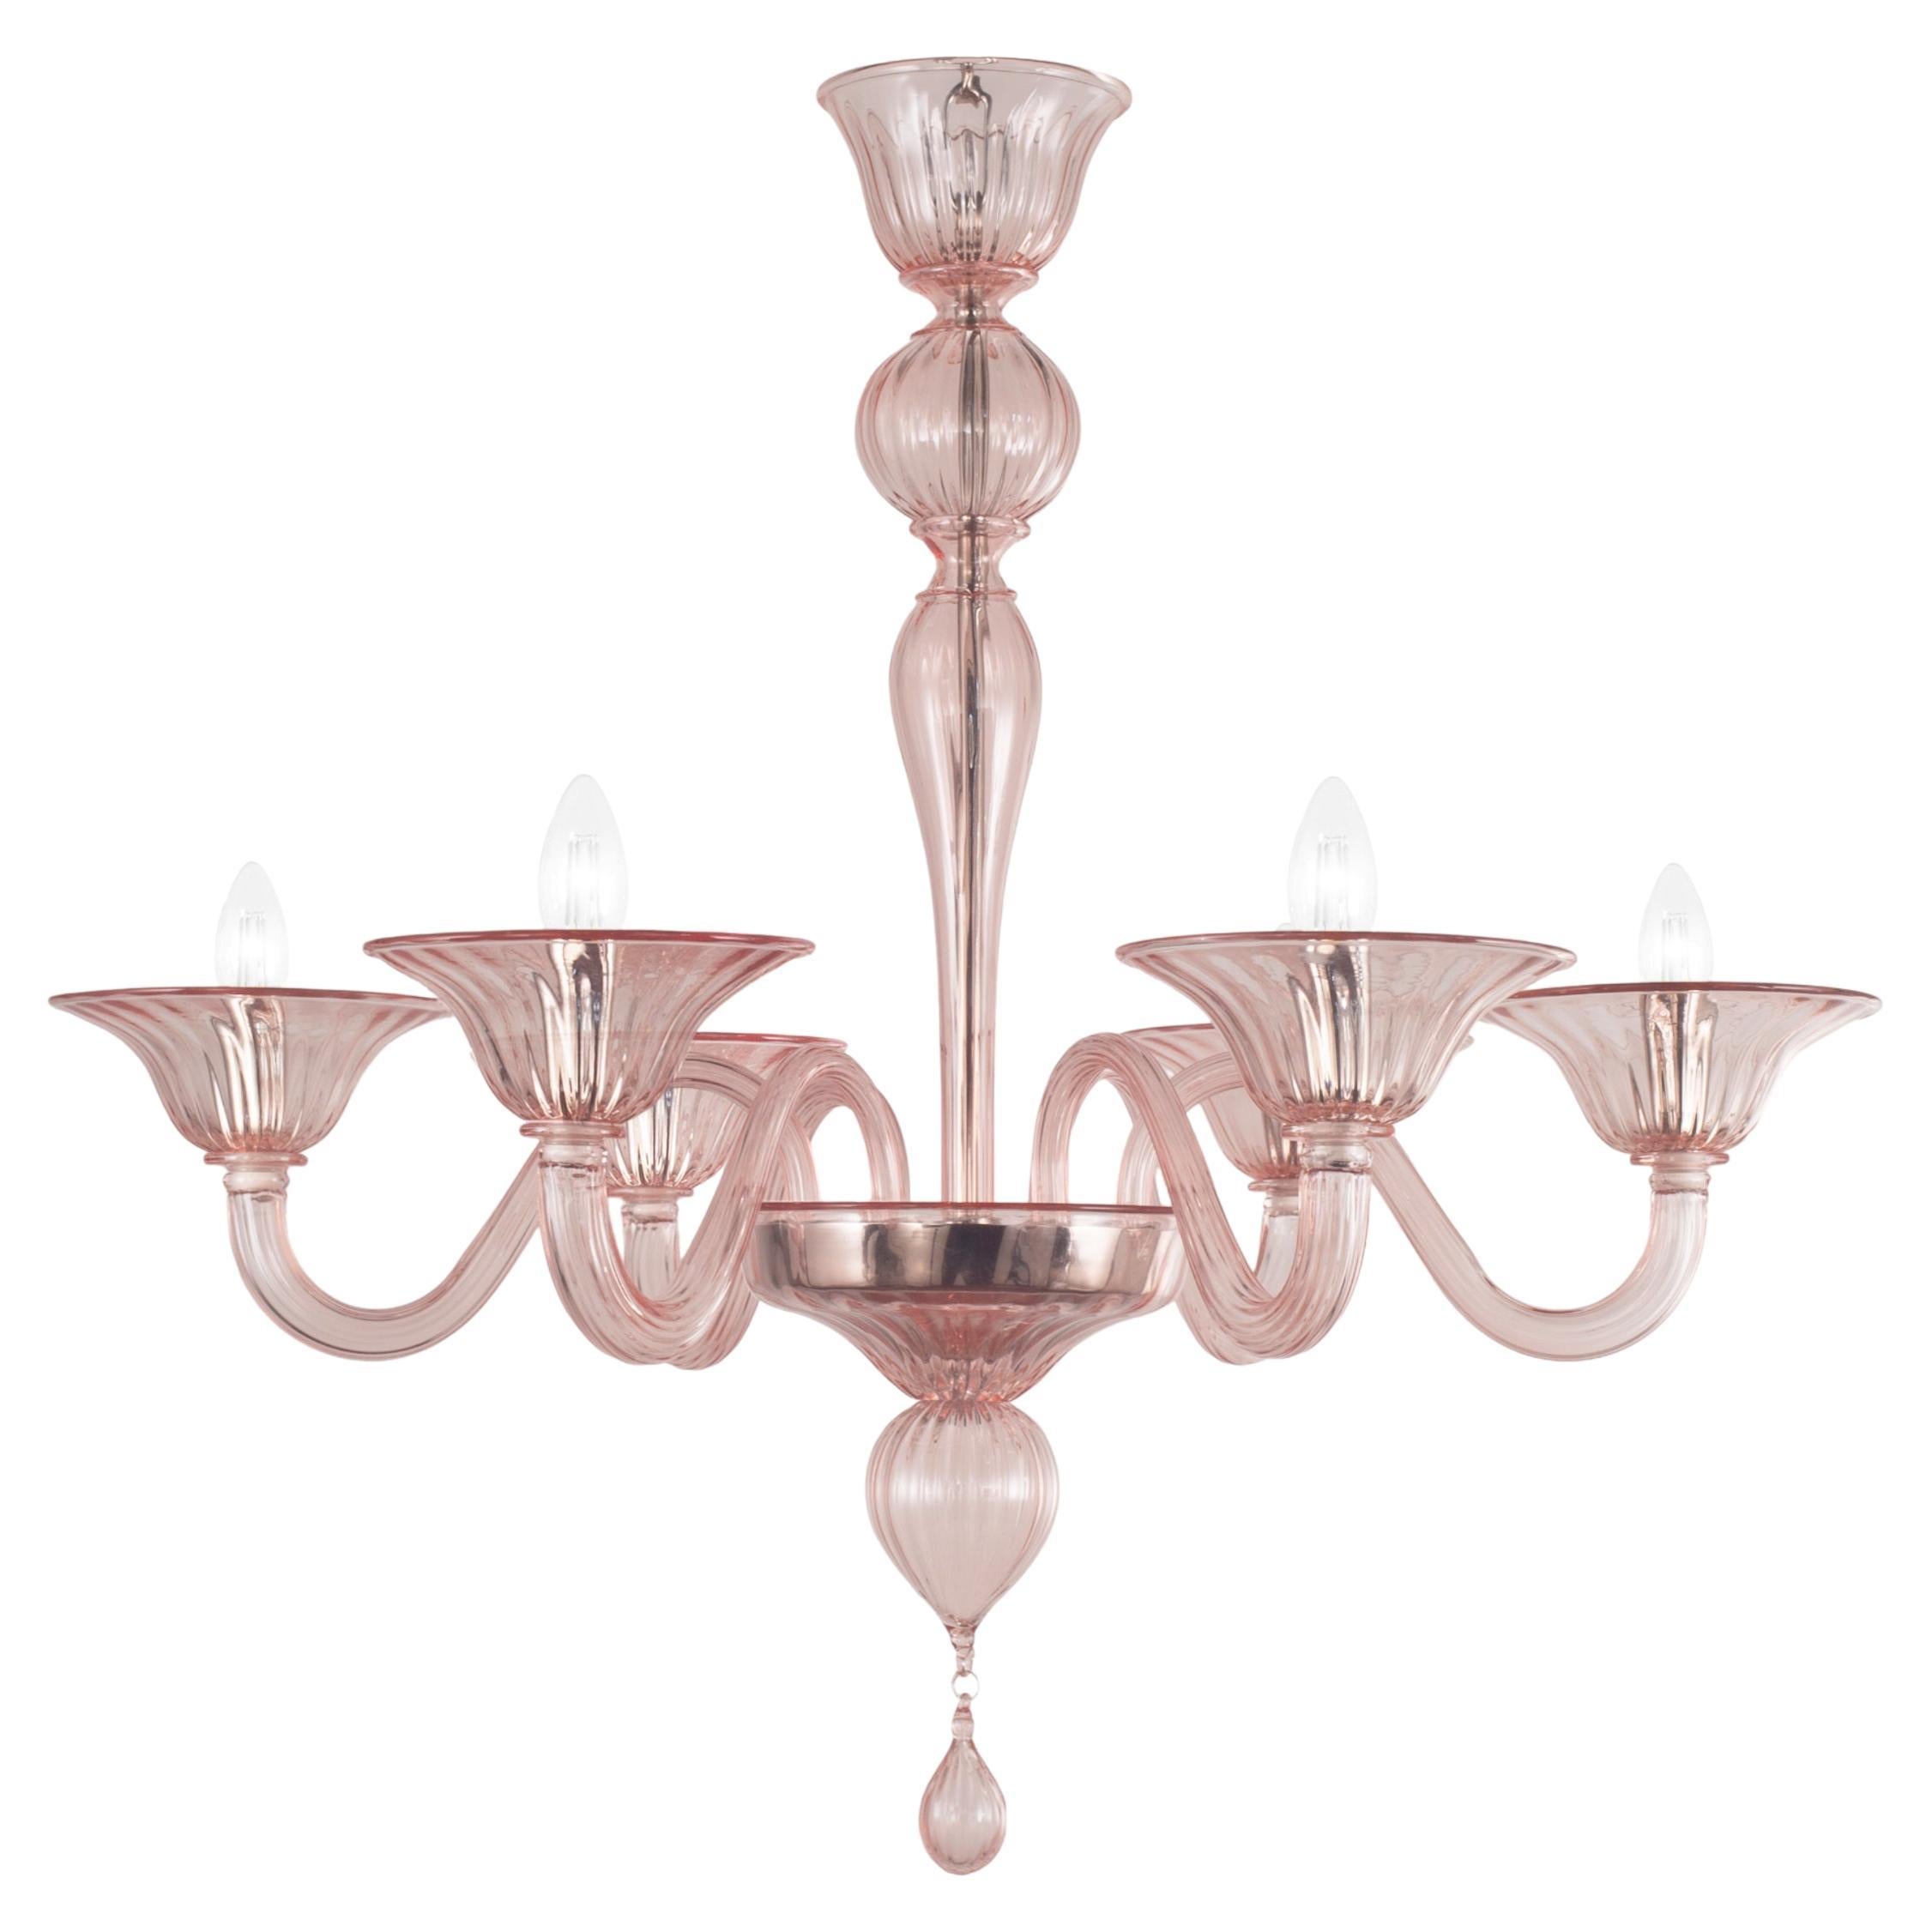 Simplicissimus Murano Chandelier 6 arms Powder Pink Glass by Multiforme in Stock For Sale